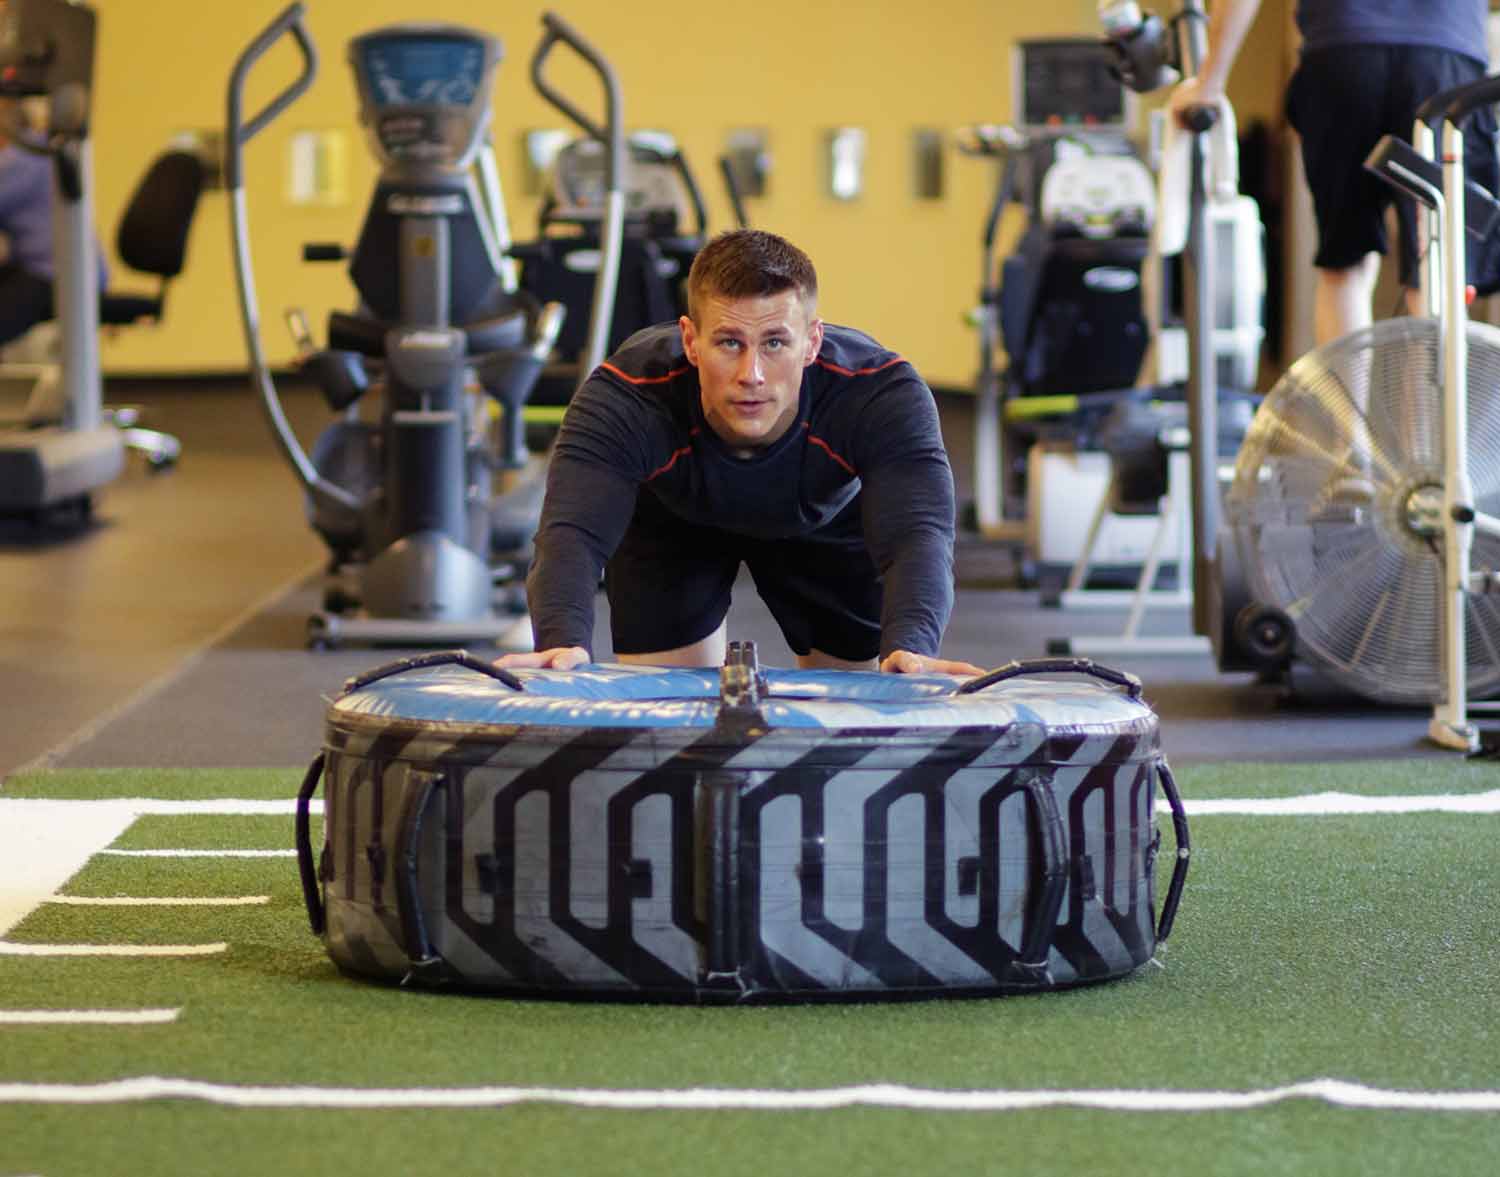 Man pushing a tire across the turf in the Performance Training Center.